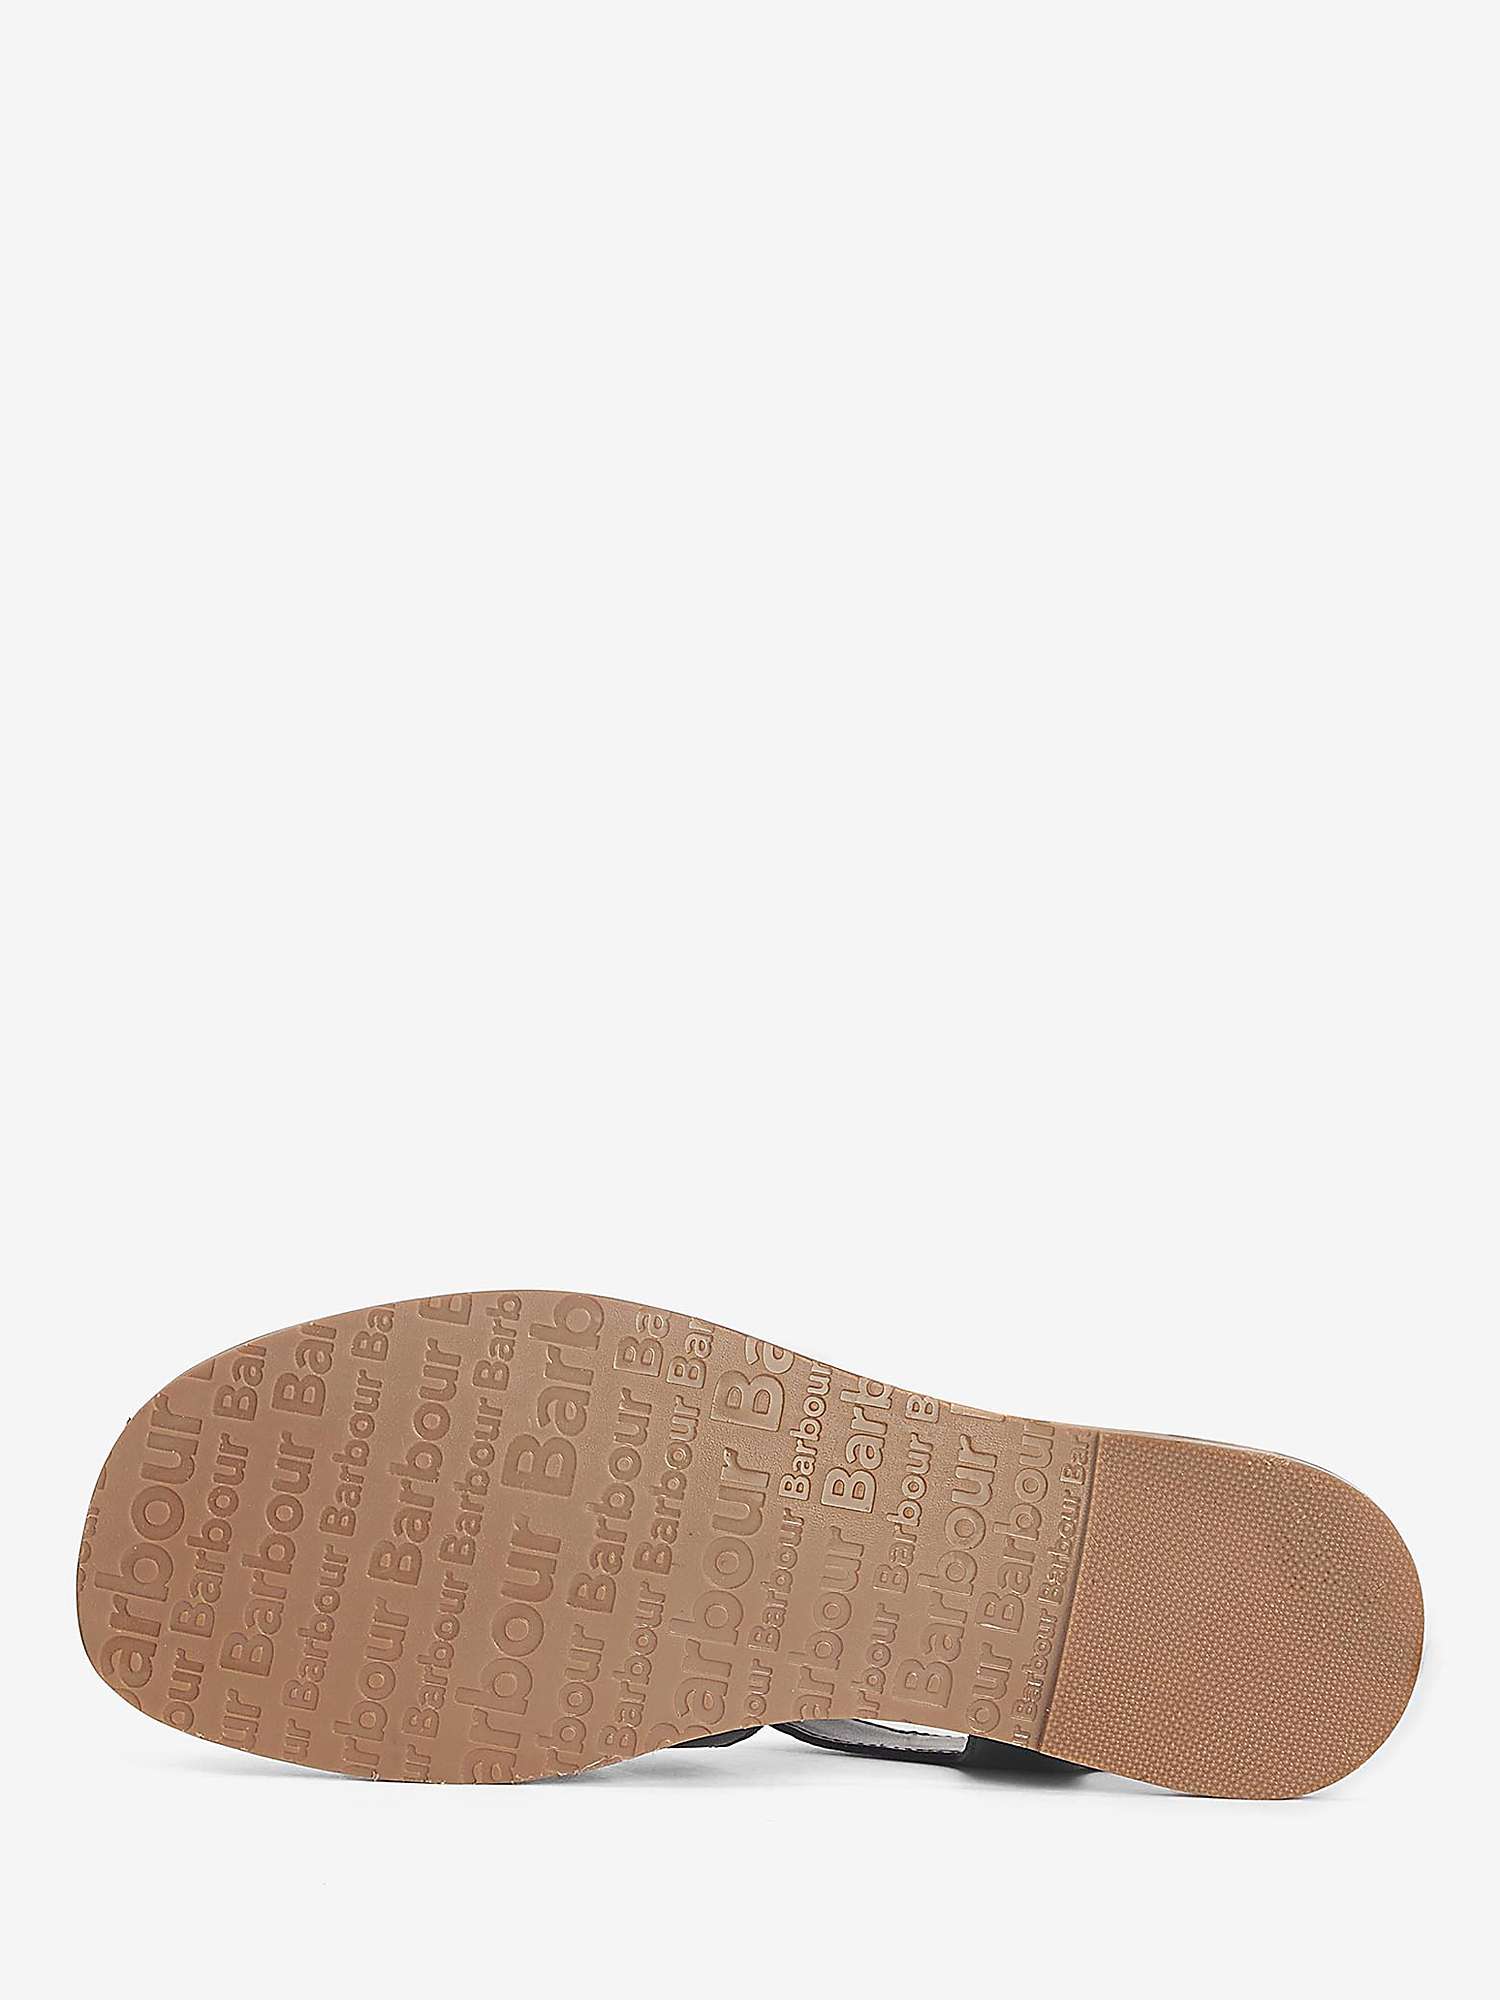 Buy Barbour Macy Leather Sandals Online at johnlewis.com